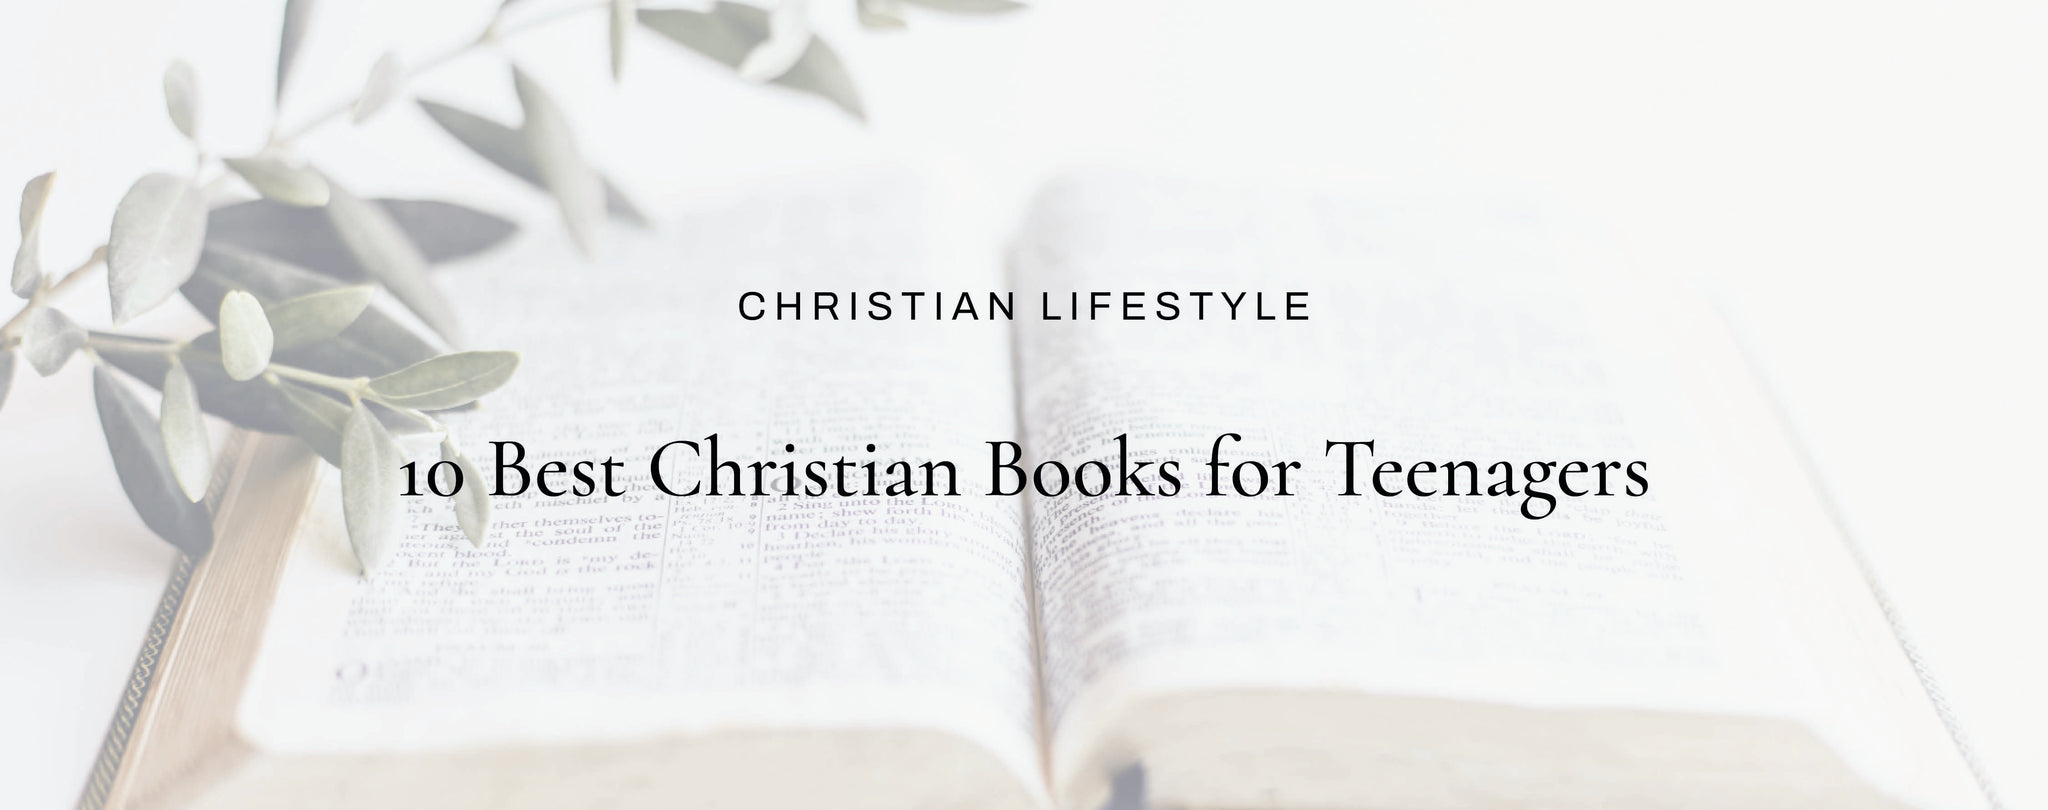 10 Best Christian Books for Teenagers